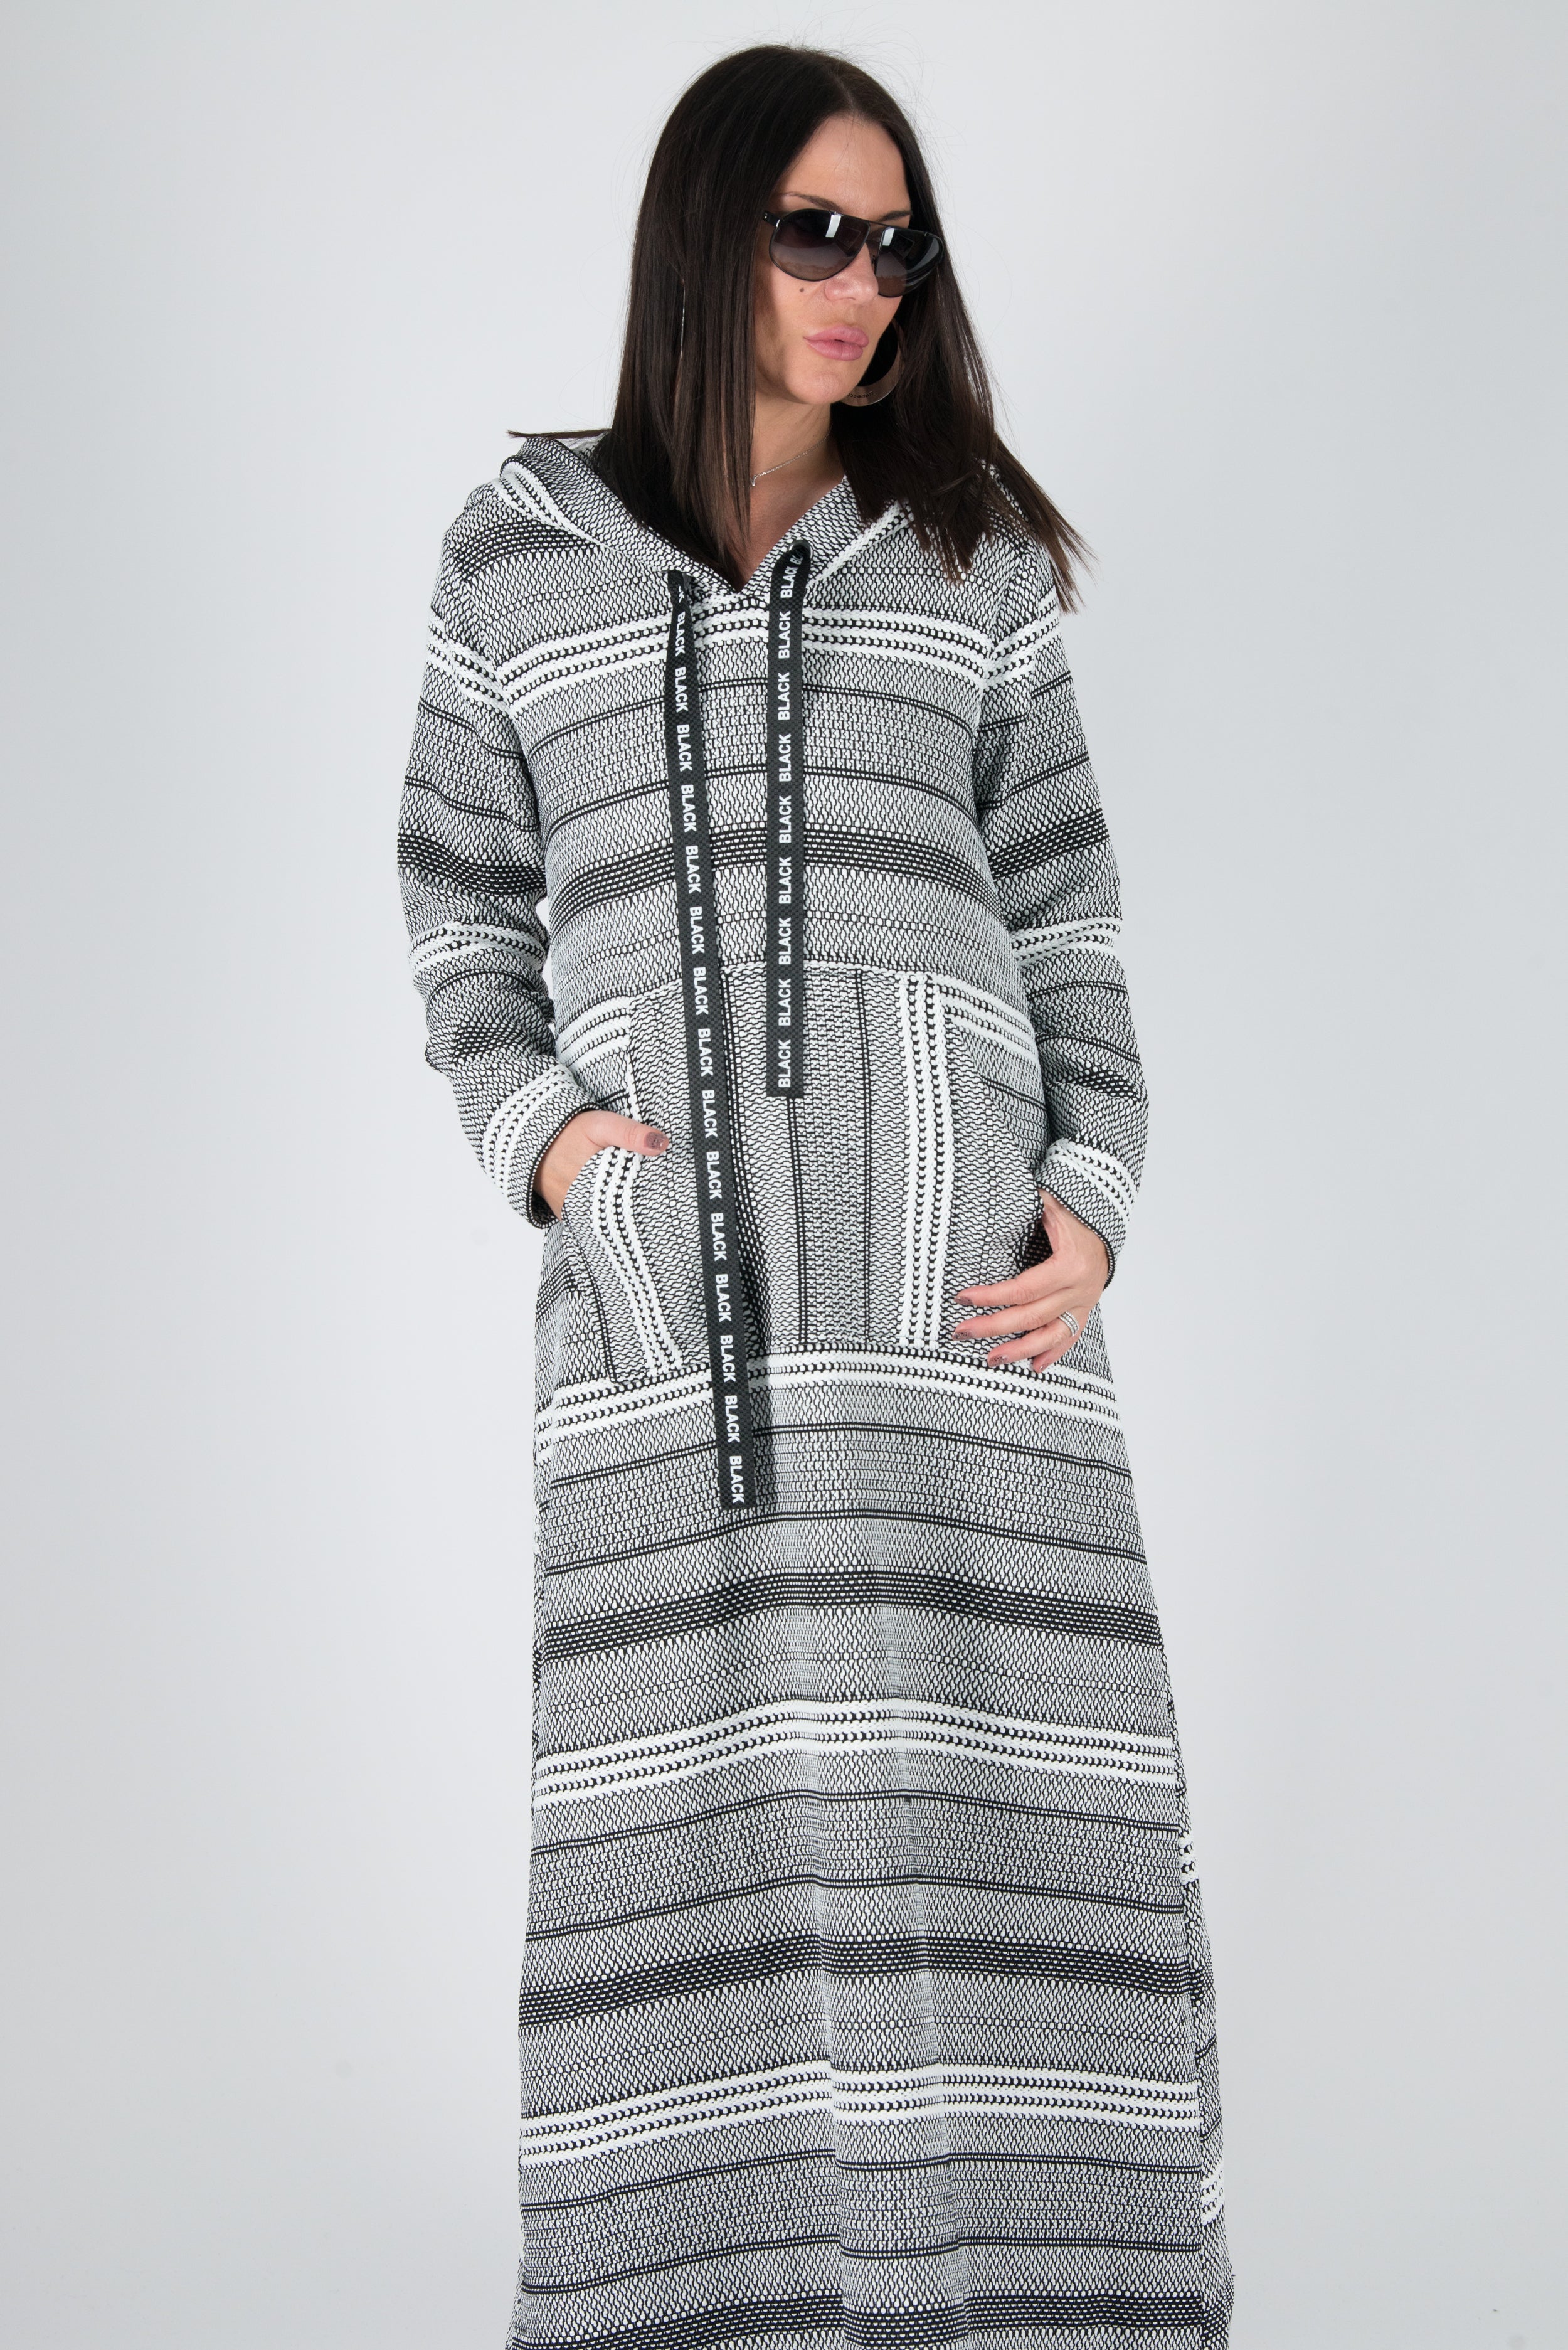 Spring Long Hooded Plus size Black and White dress, New Arrival